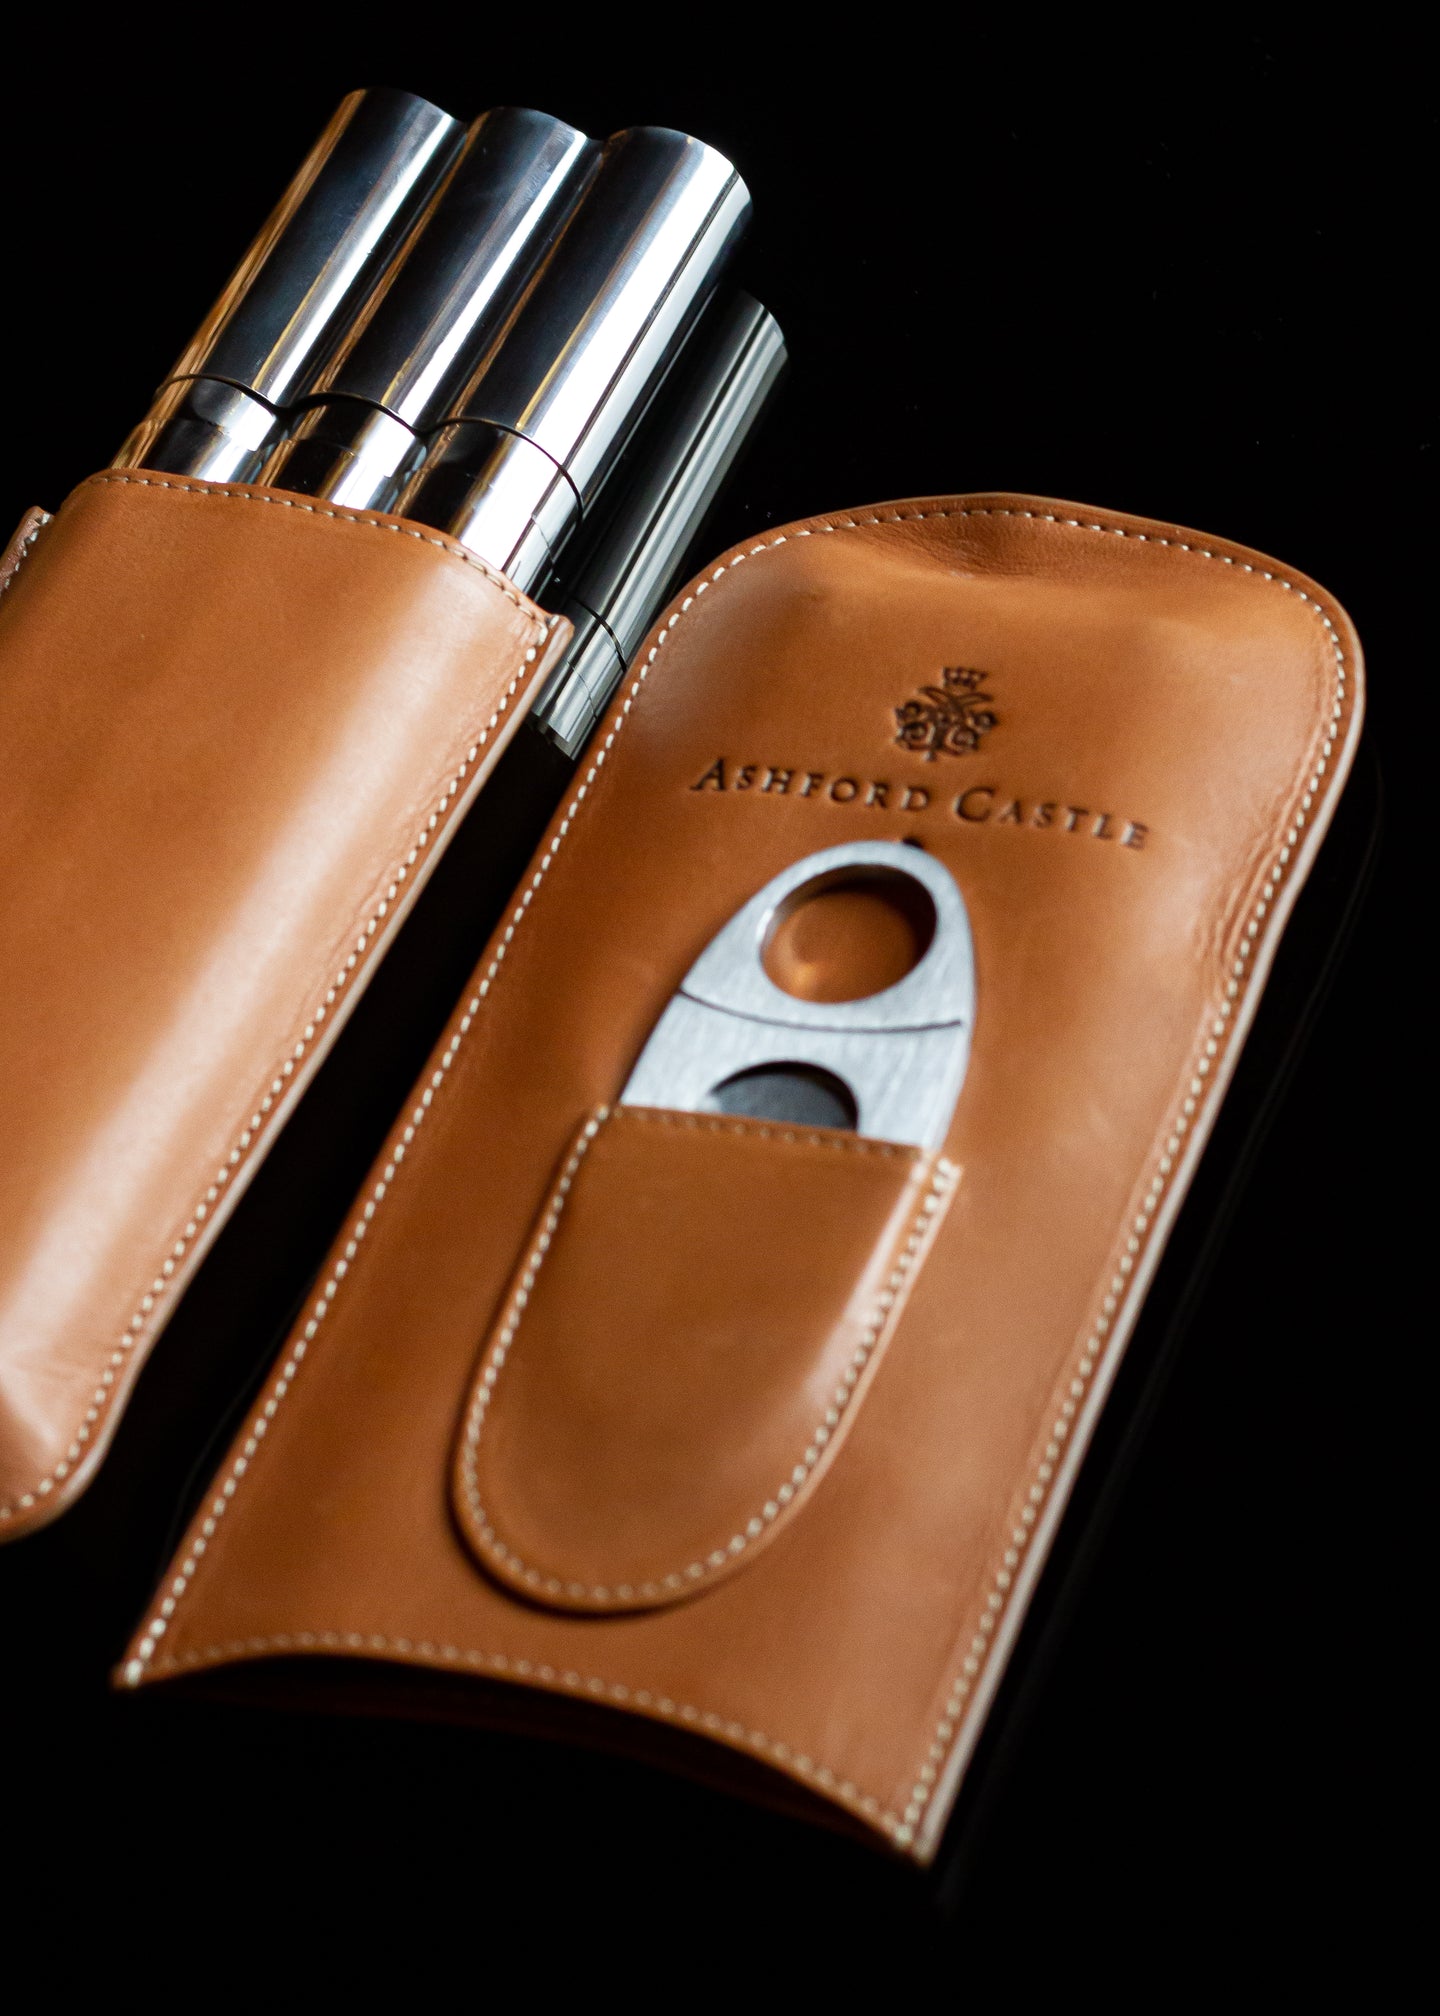 Ashford Castle Leather Cigar Case with Cutter Mrs Tea's Boutique and Bakery